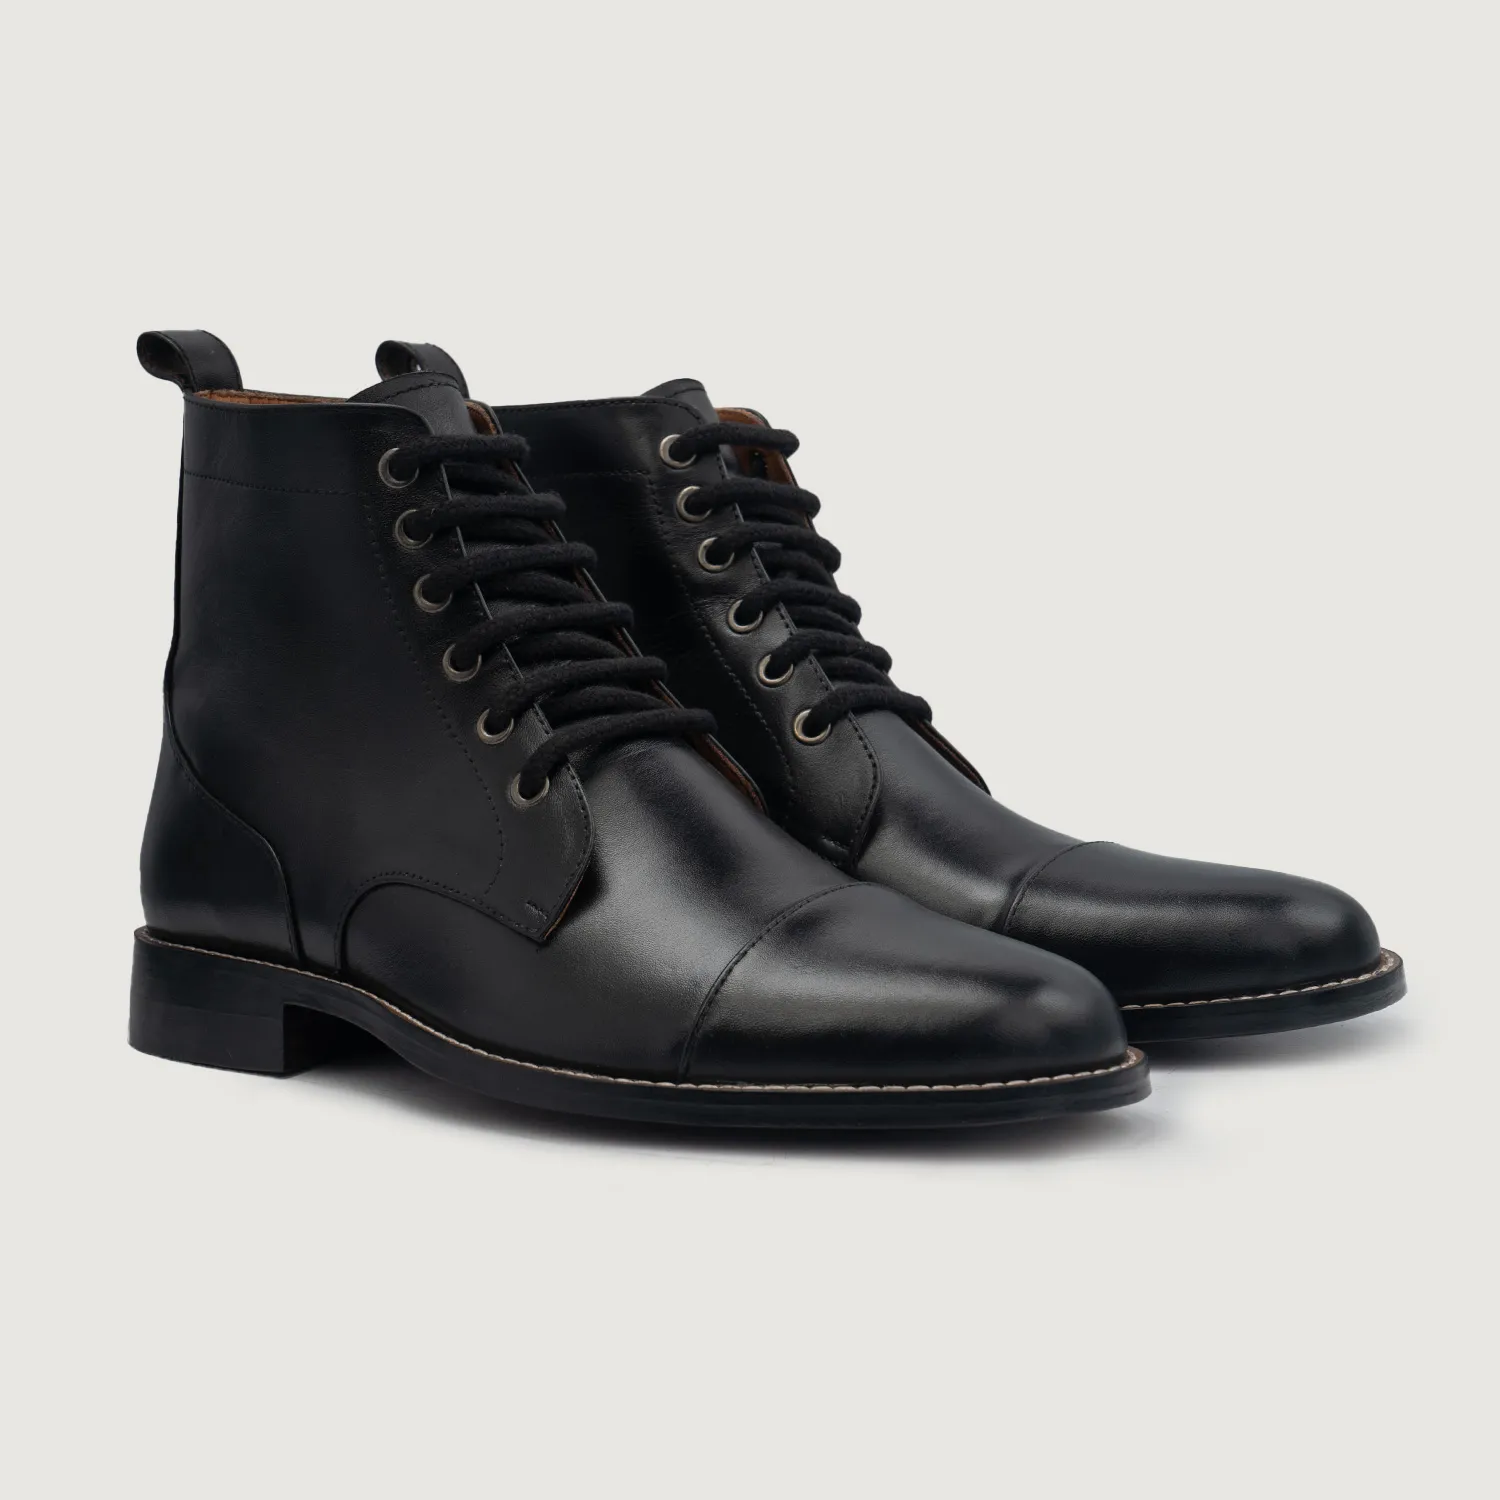 Men’s Leather Boots – Formal Edition